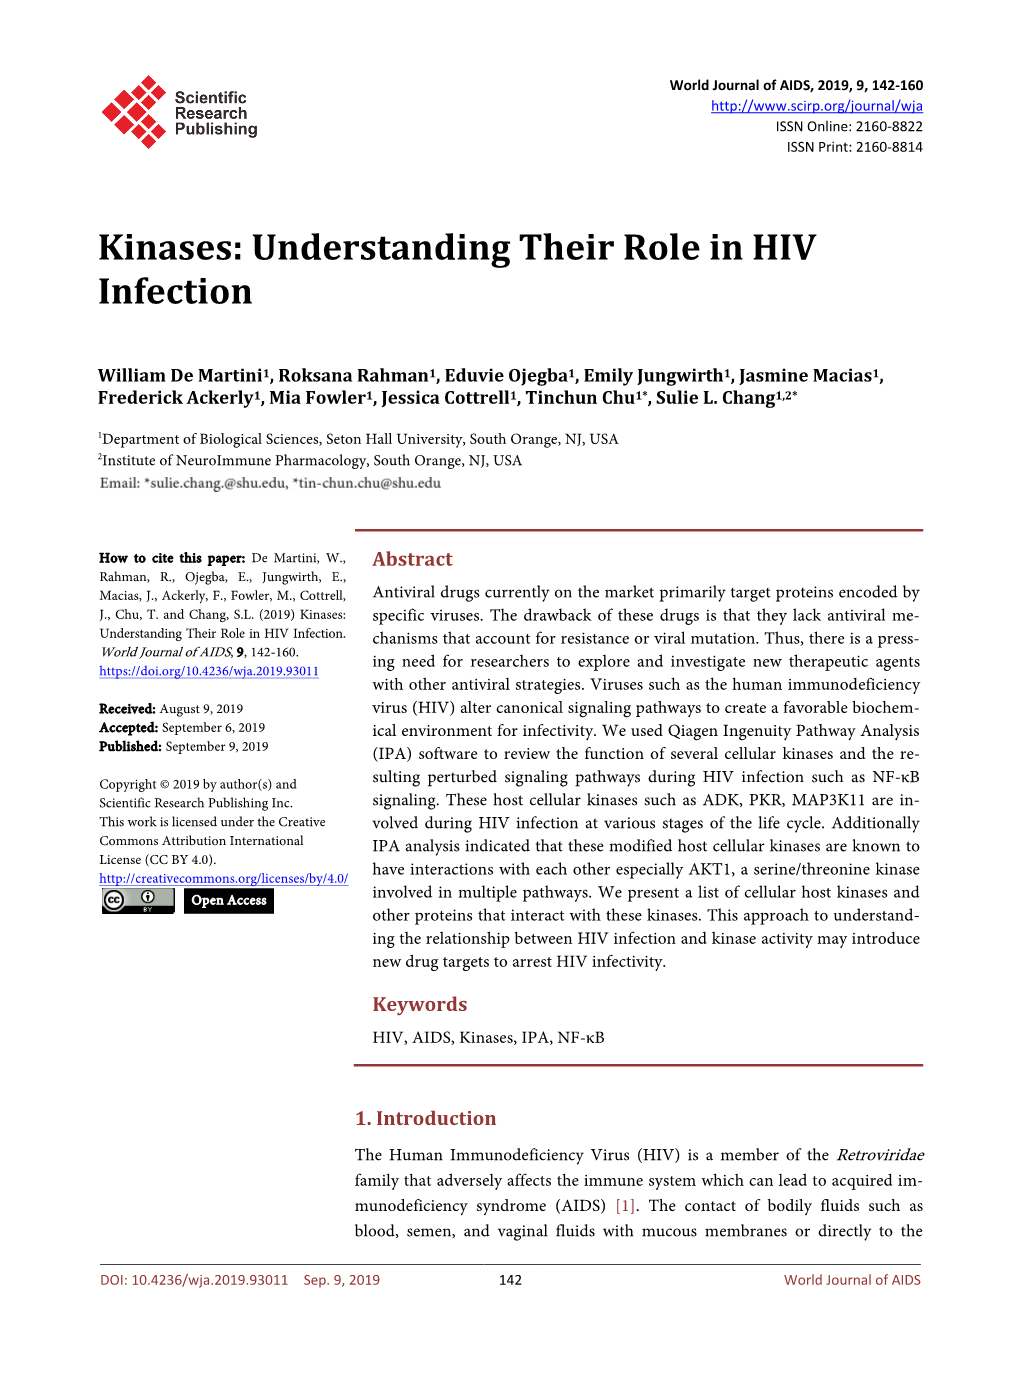 Kinases: Understanding Their Role in HIV Infection